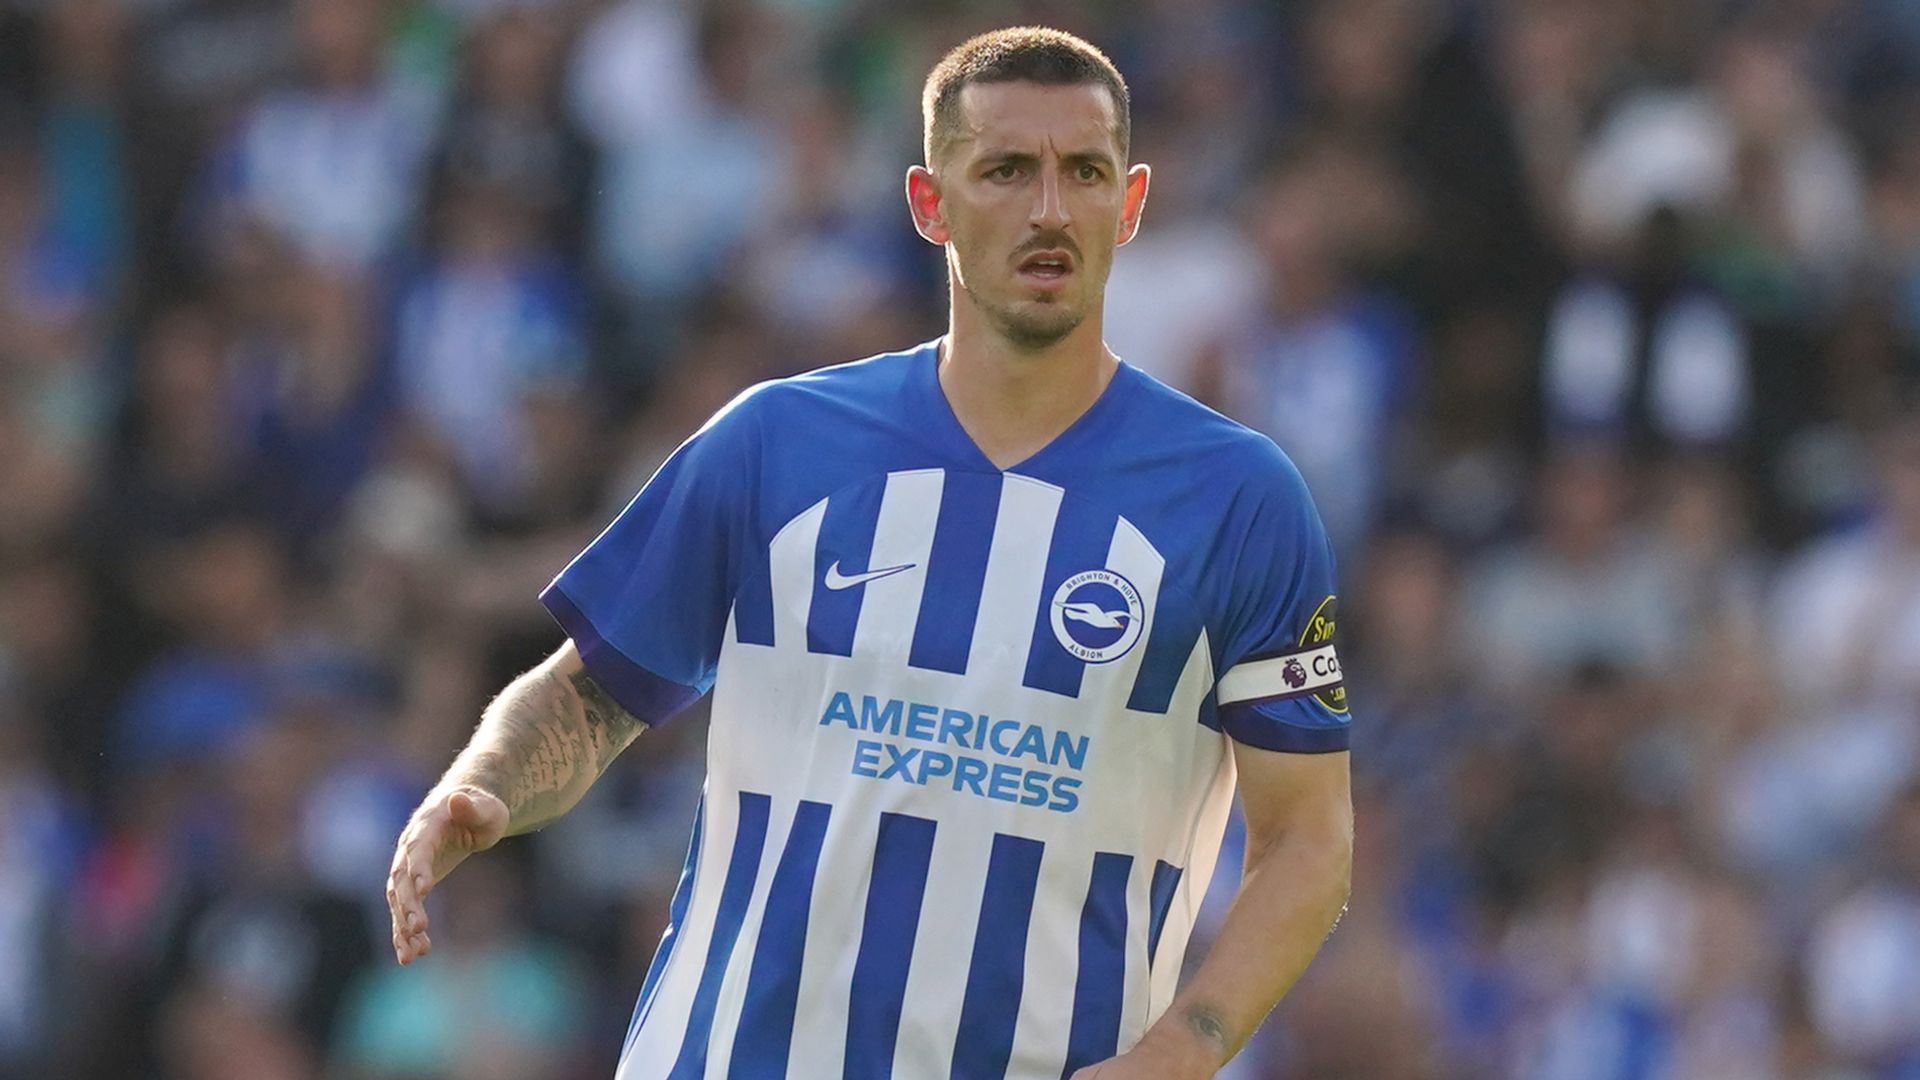 Brighton vs Brentford preview: Dunk, Dahoud suspended for Seagulls